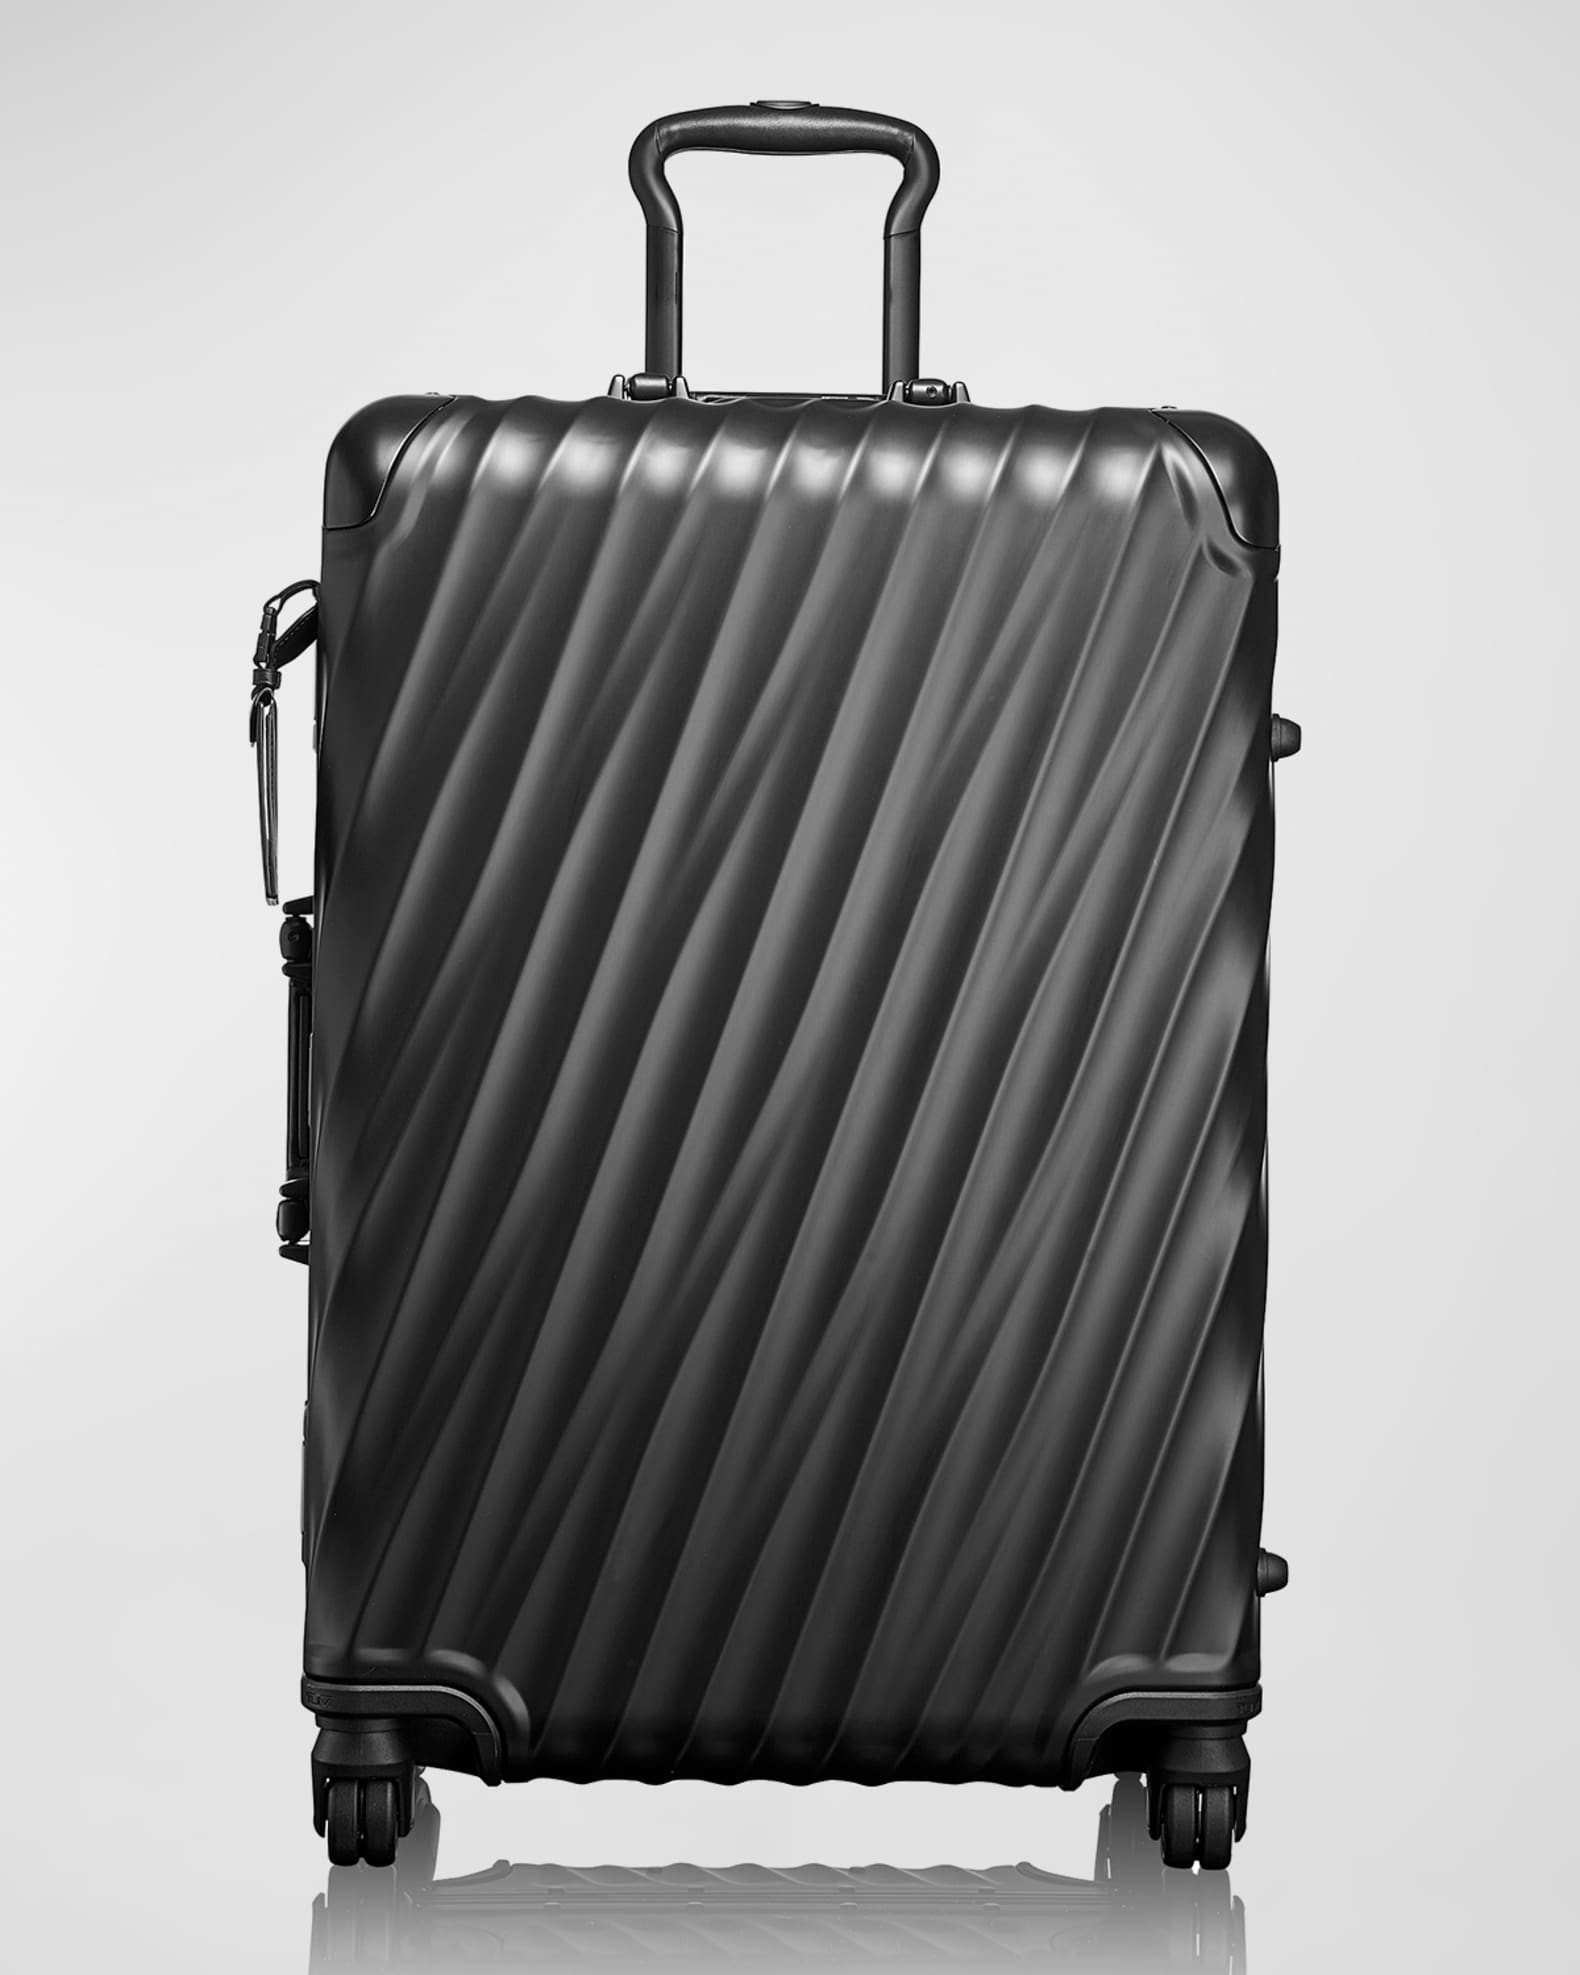 Tumi Short Trip Packing Carry-On Luggage, Black | Neiman Marcus